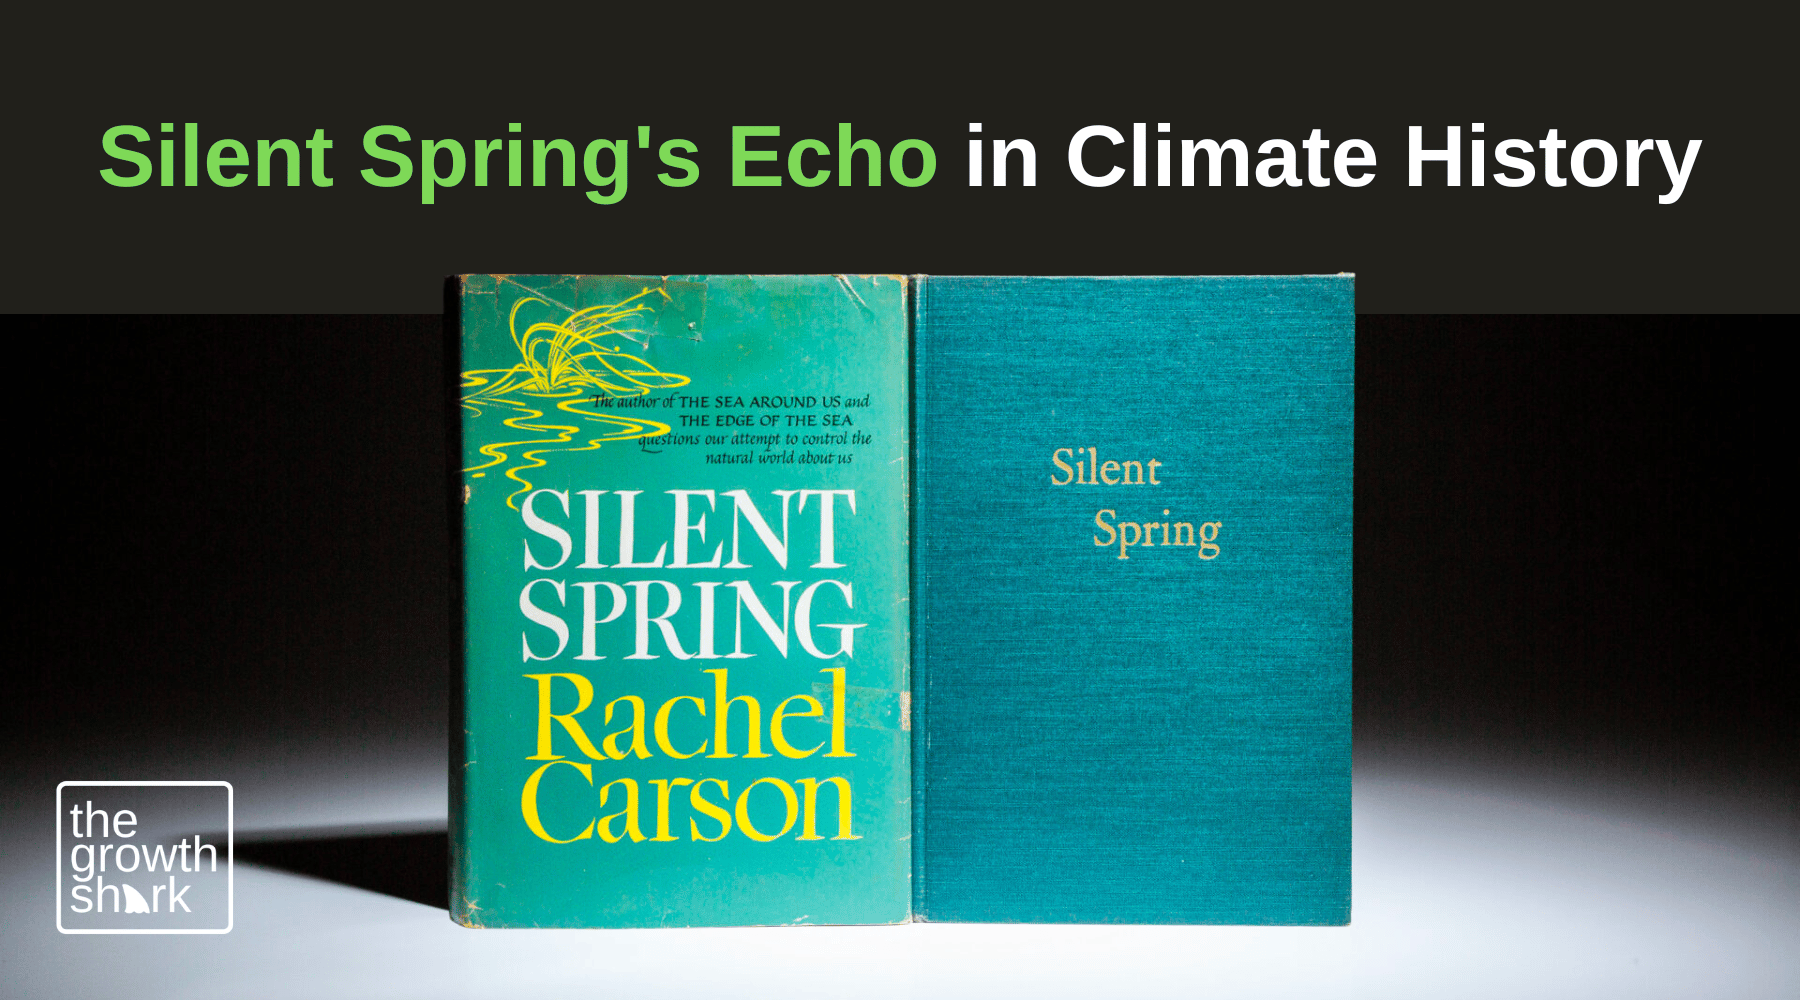 Rachel Carson: Silent Spring's Echo in Climate History